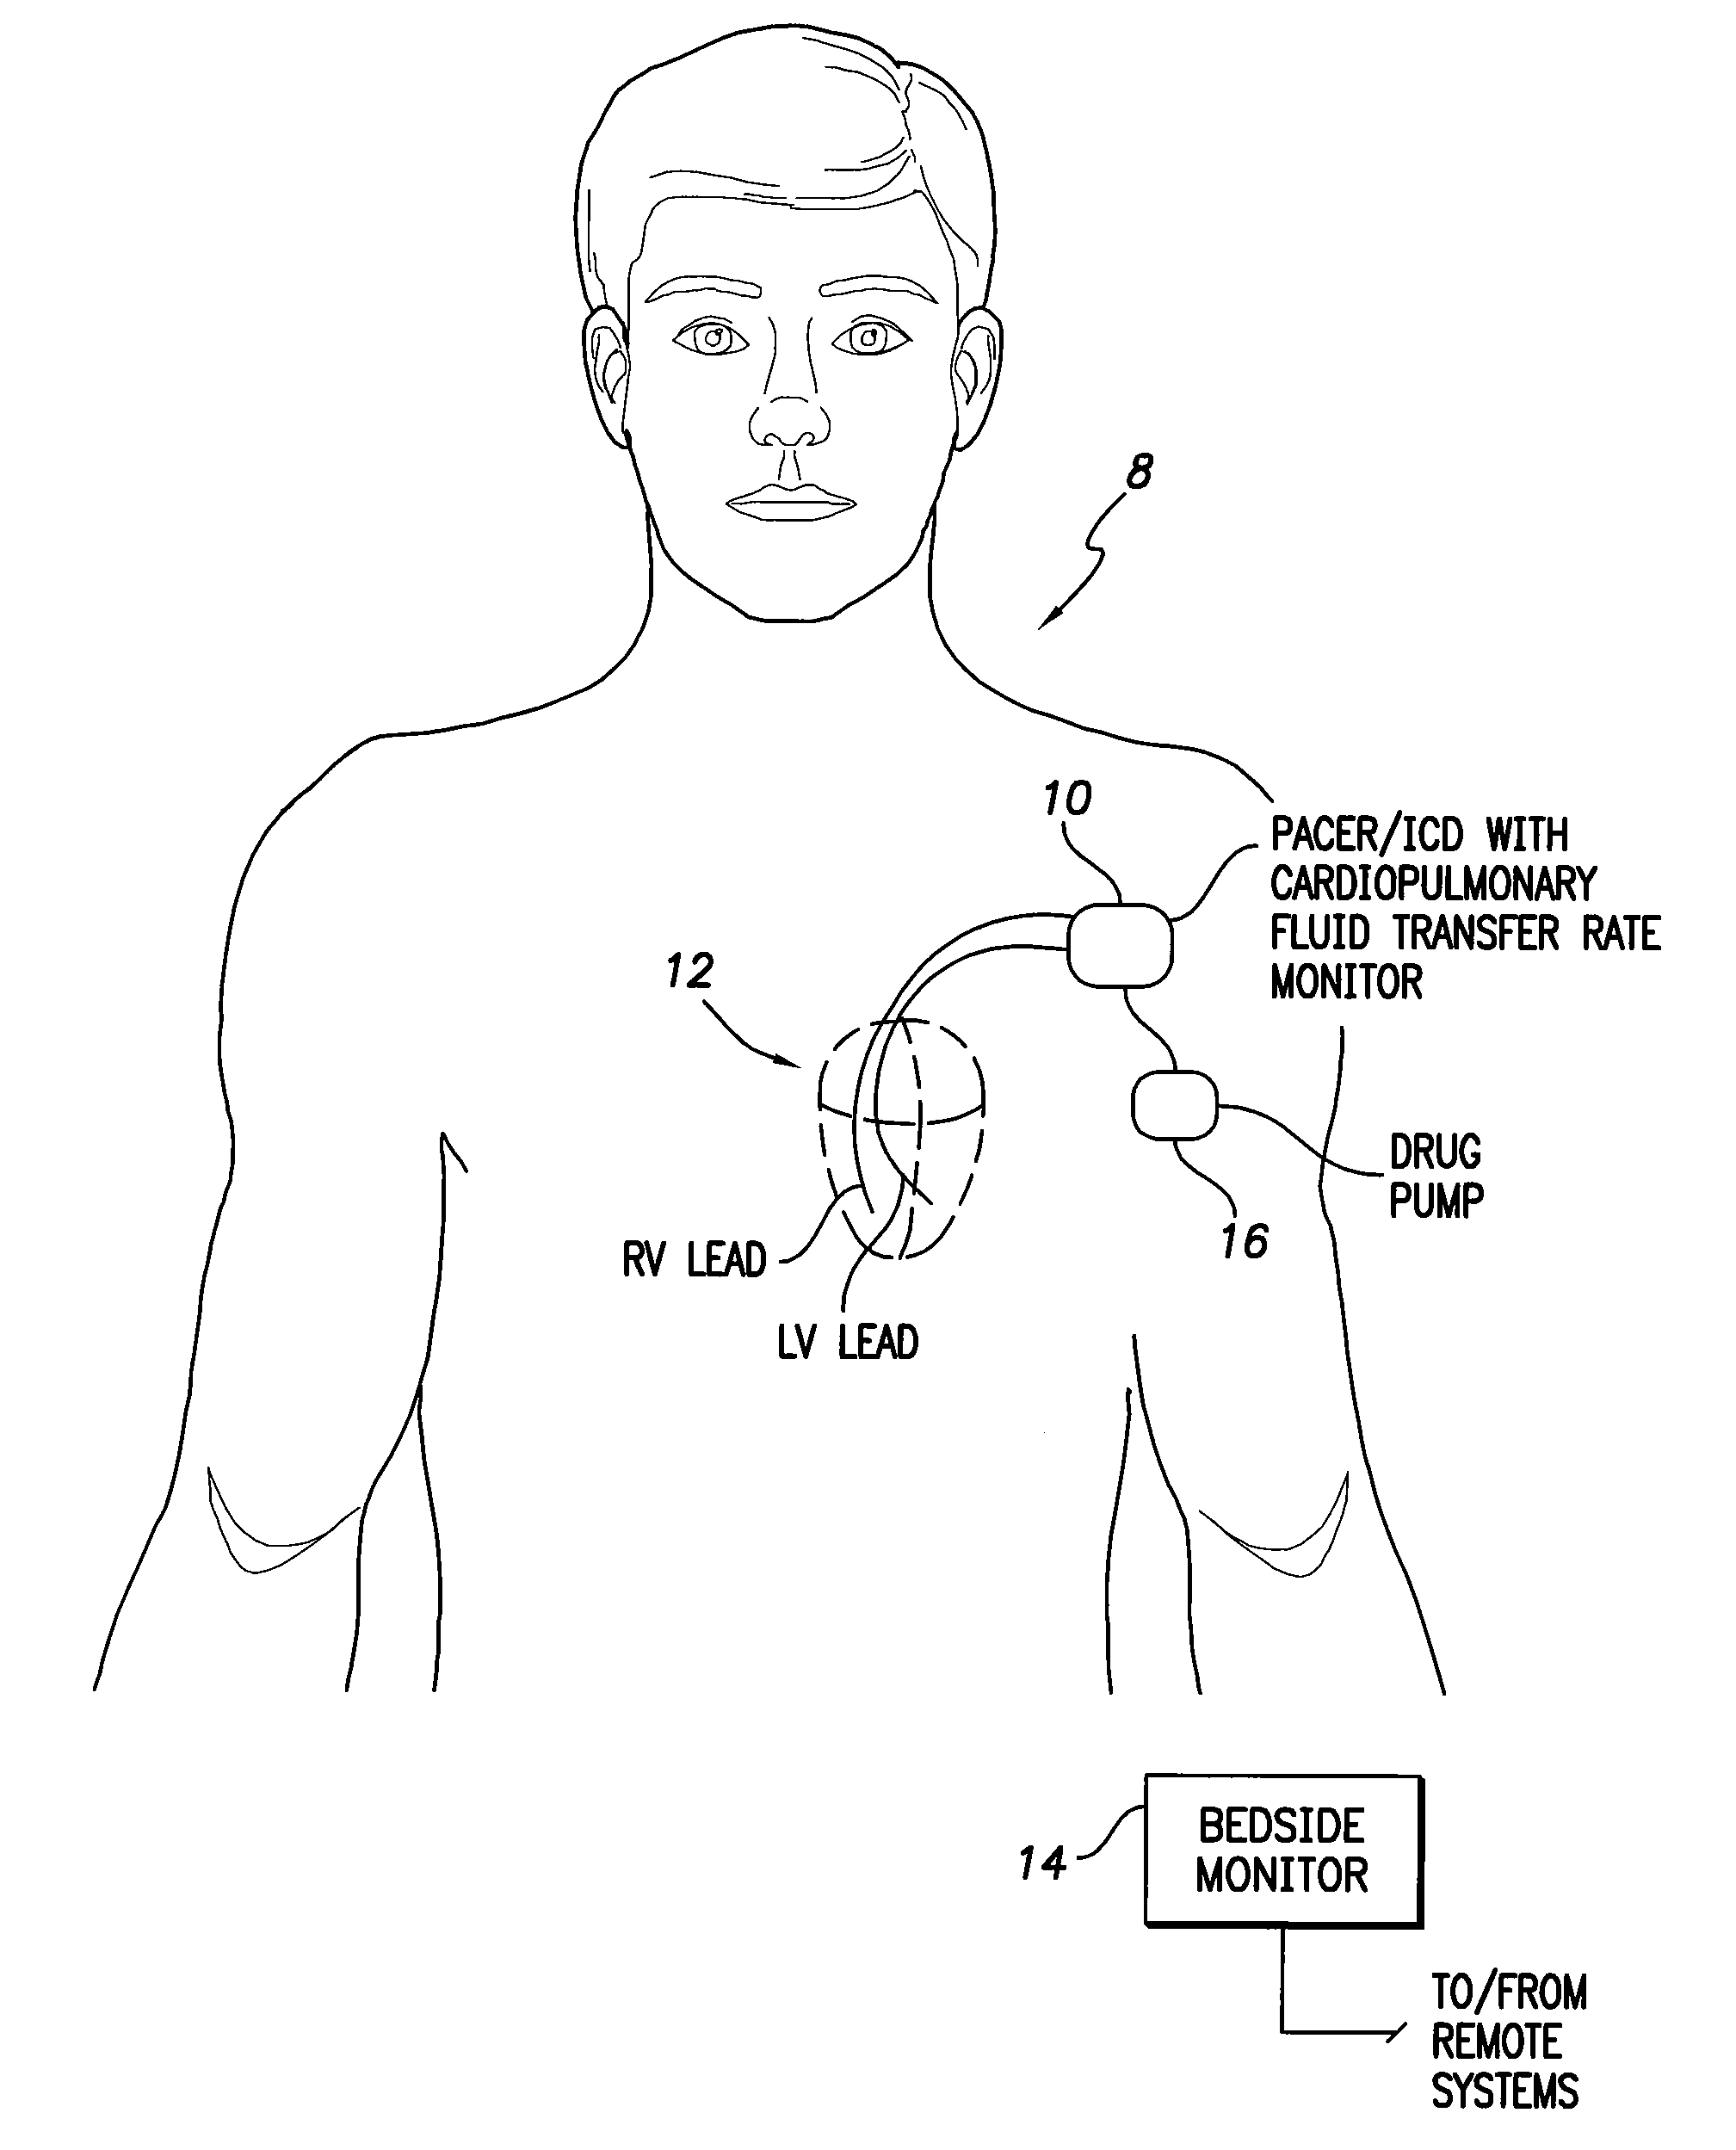 System and method for monitoring cardiopulmonary fluid transfer rates using an implantable medical device